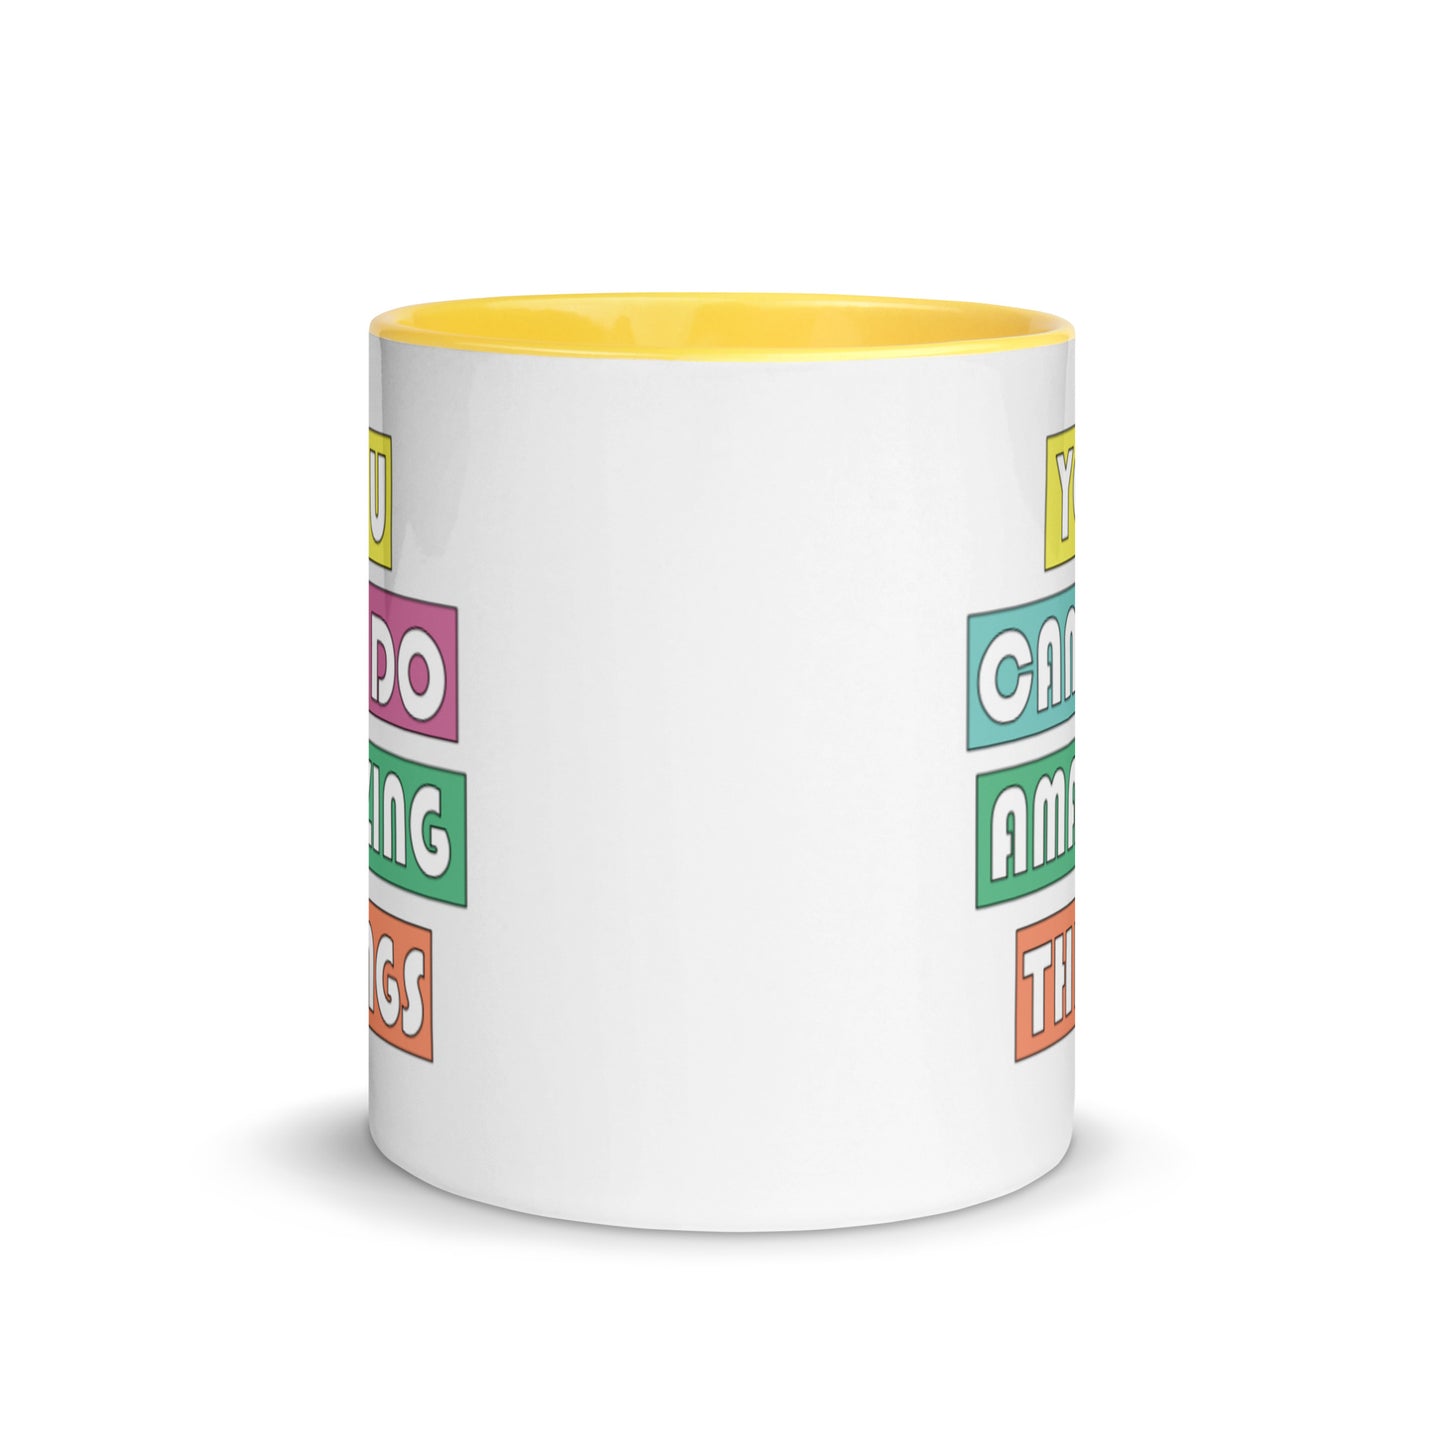 you can do amazing things mug with yellow interior